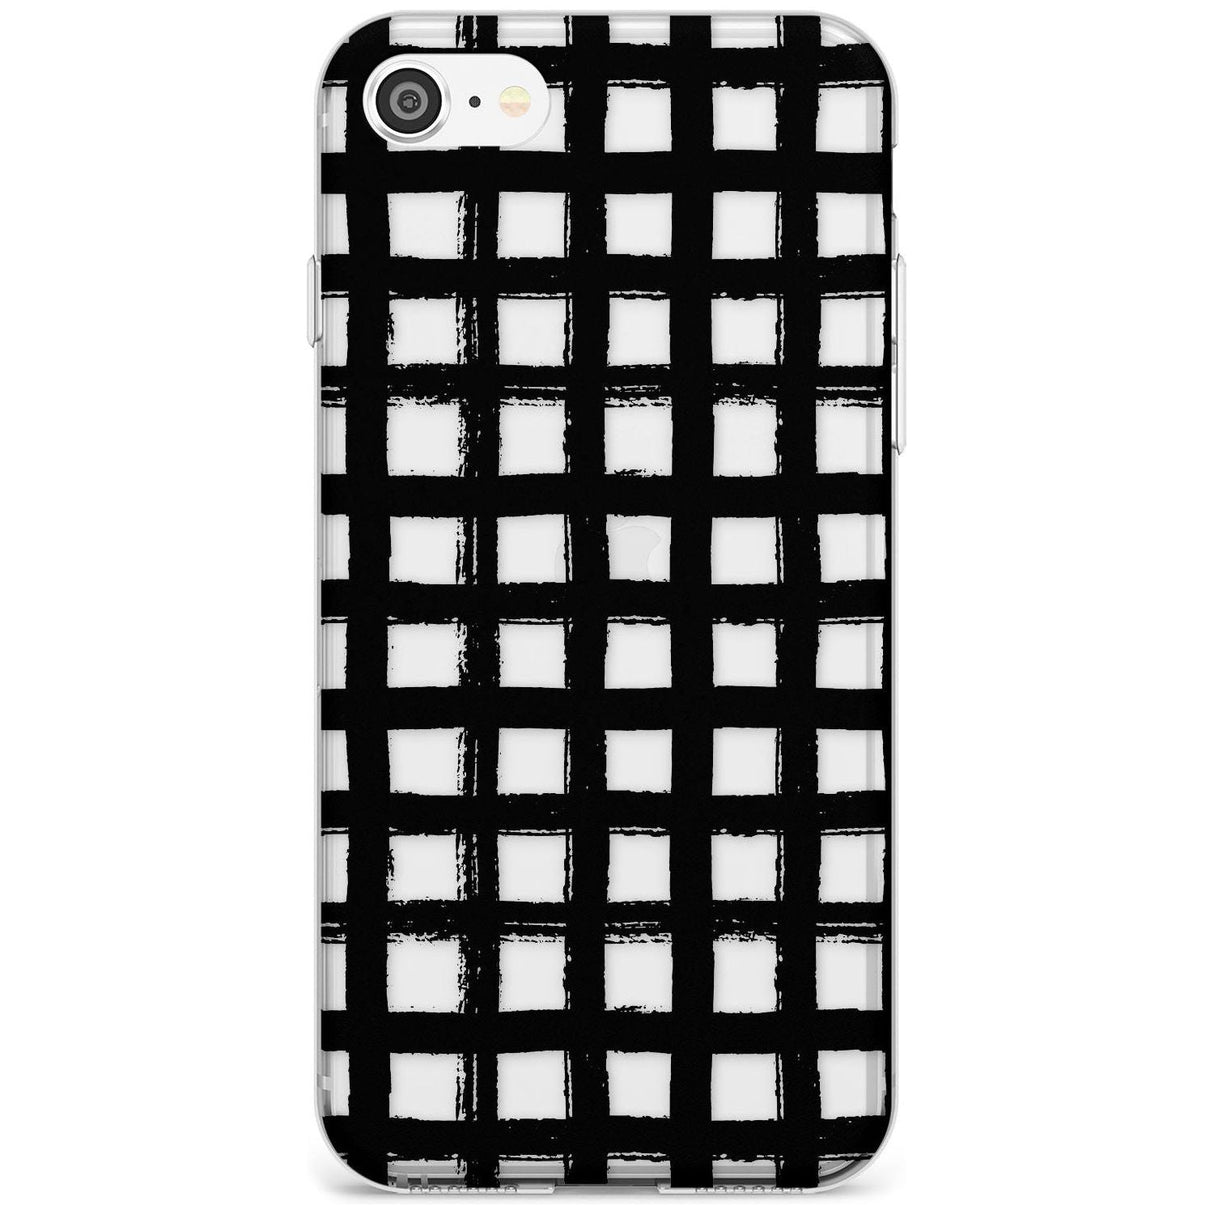 Messy Black Grid - Clear Black Impact Phone Case for iPhone SE 8 7 Plus